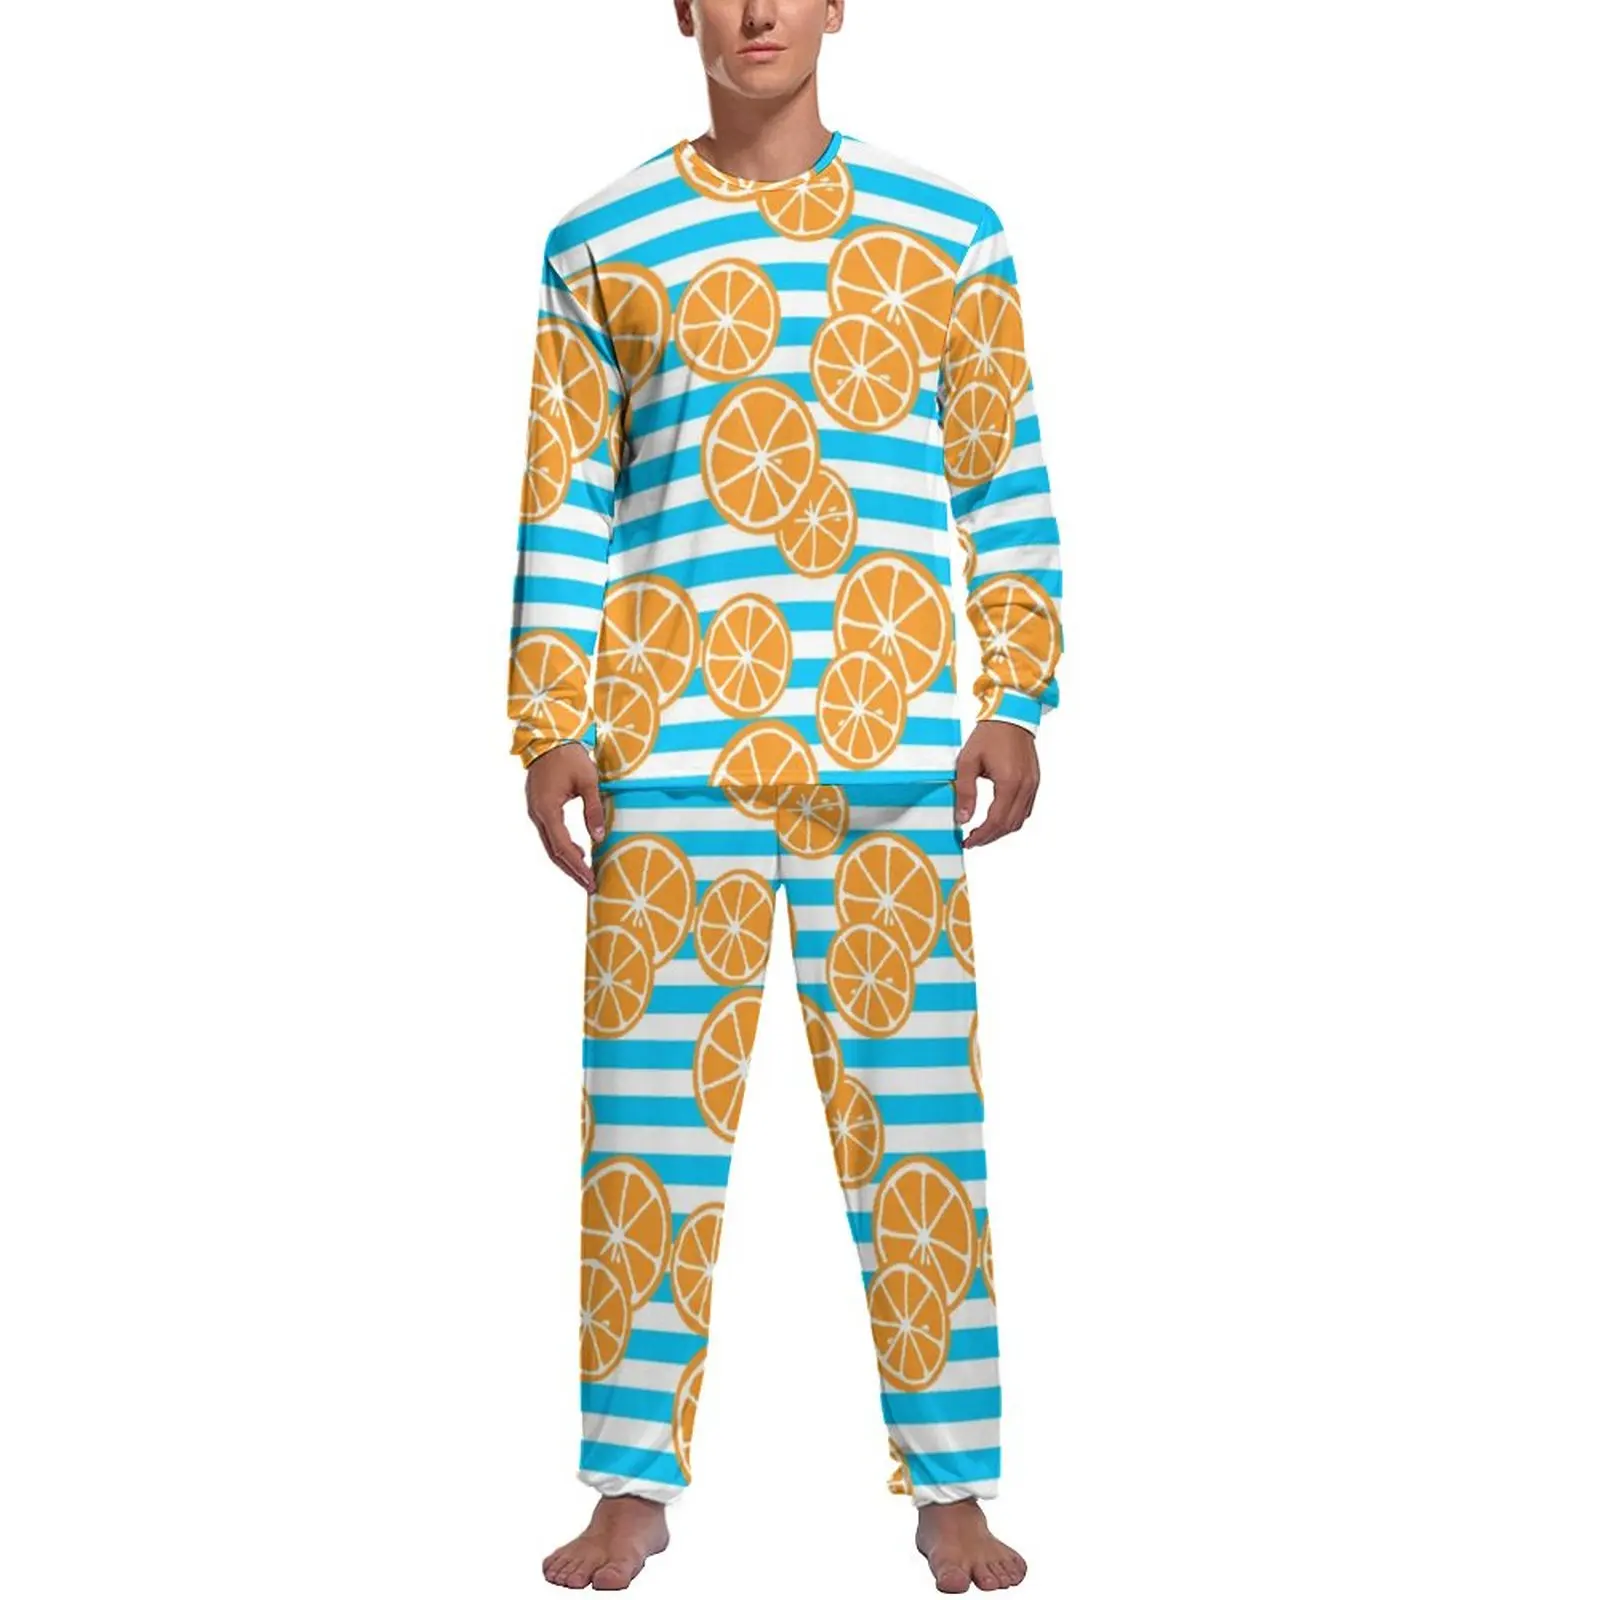 

Oranges Slices Pajamas Autumn White and Blue Stripes Casual Nightwear Men 2 Pieces Printed Long-Sleeve Cute Pajama Sets